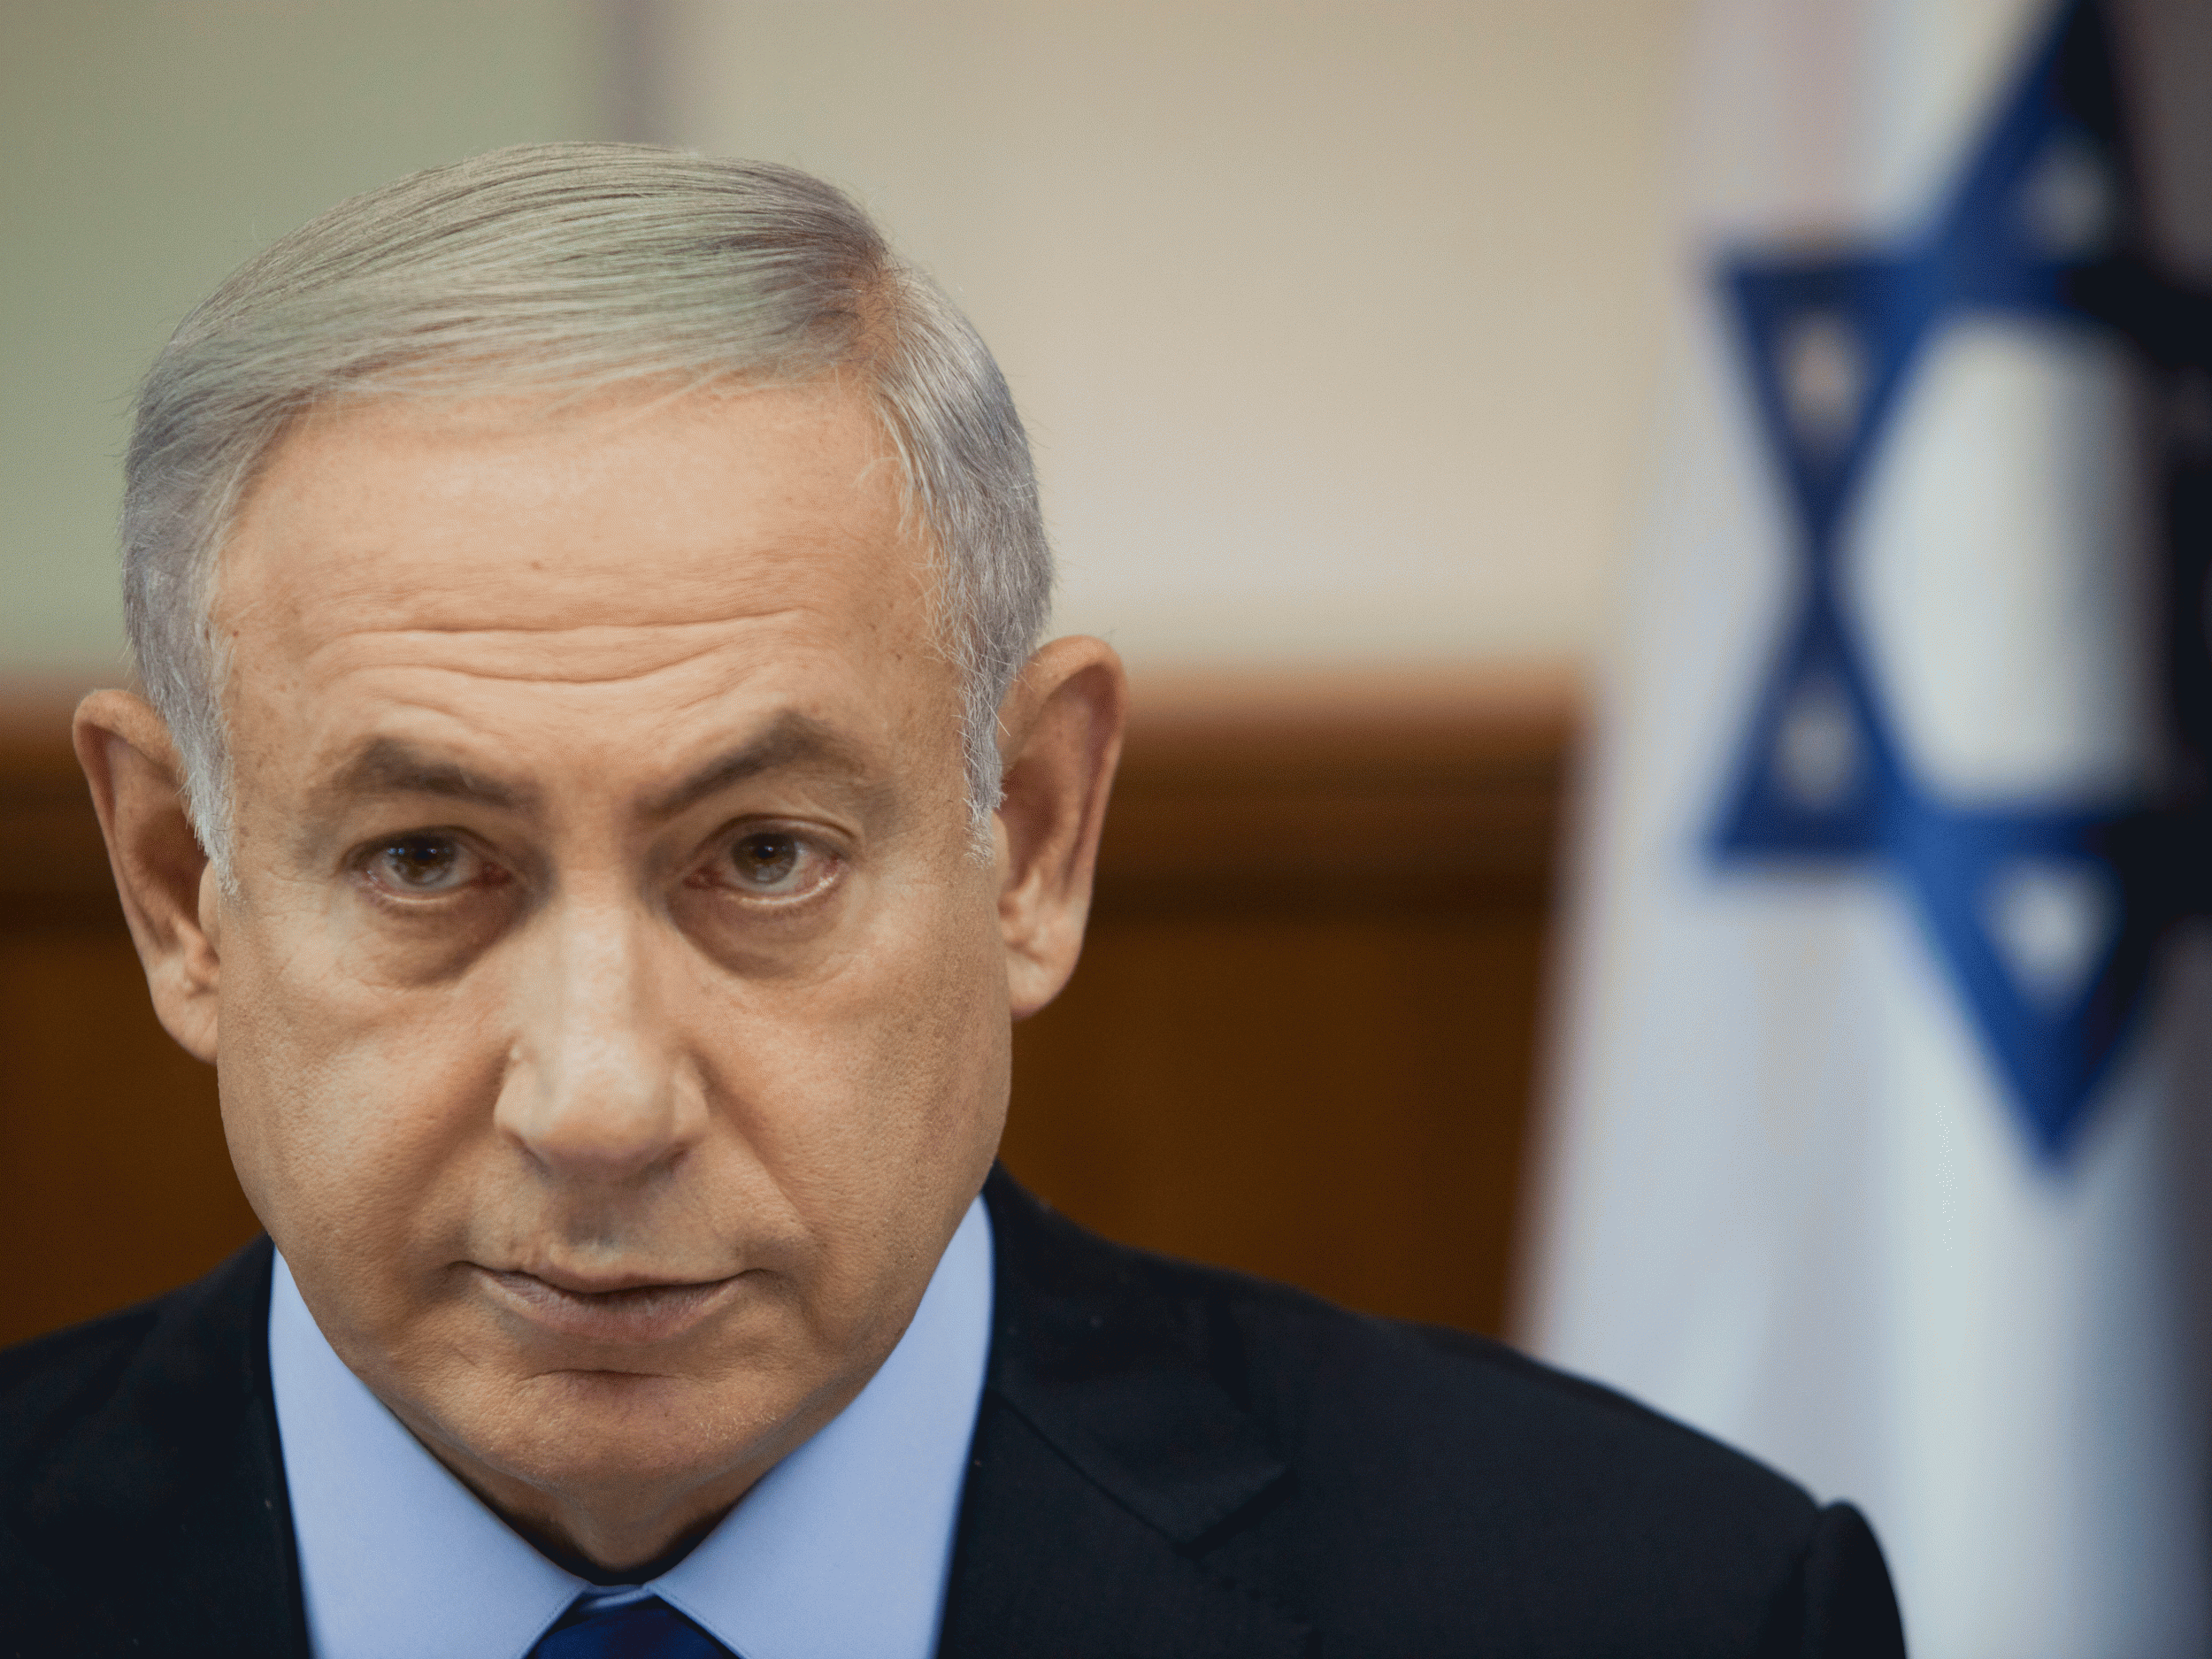 Israeli media have reported a large amount of money being transferred to Mr Netanyahu but the Justice Ministry has said these claims are "inaccurate"